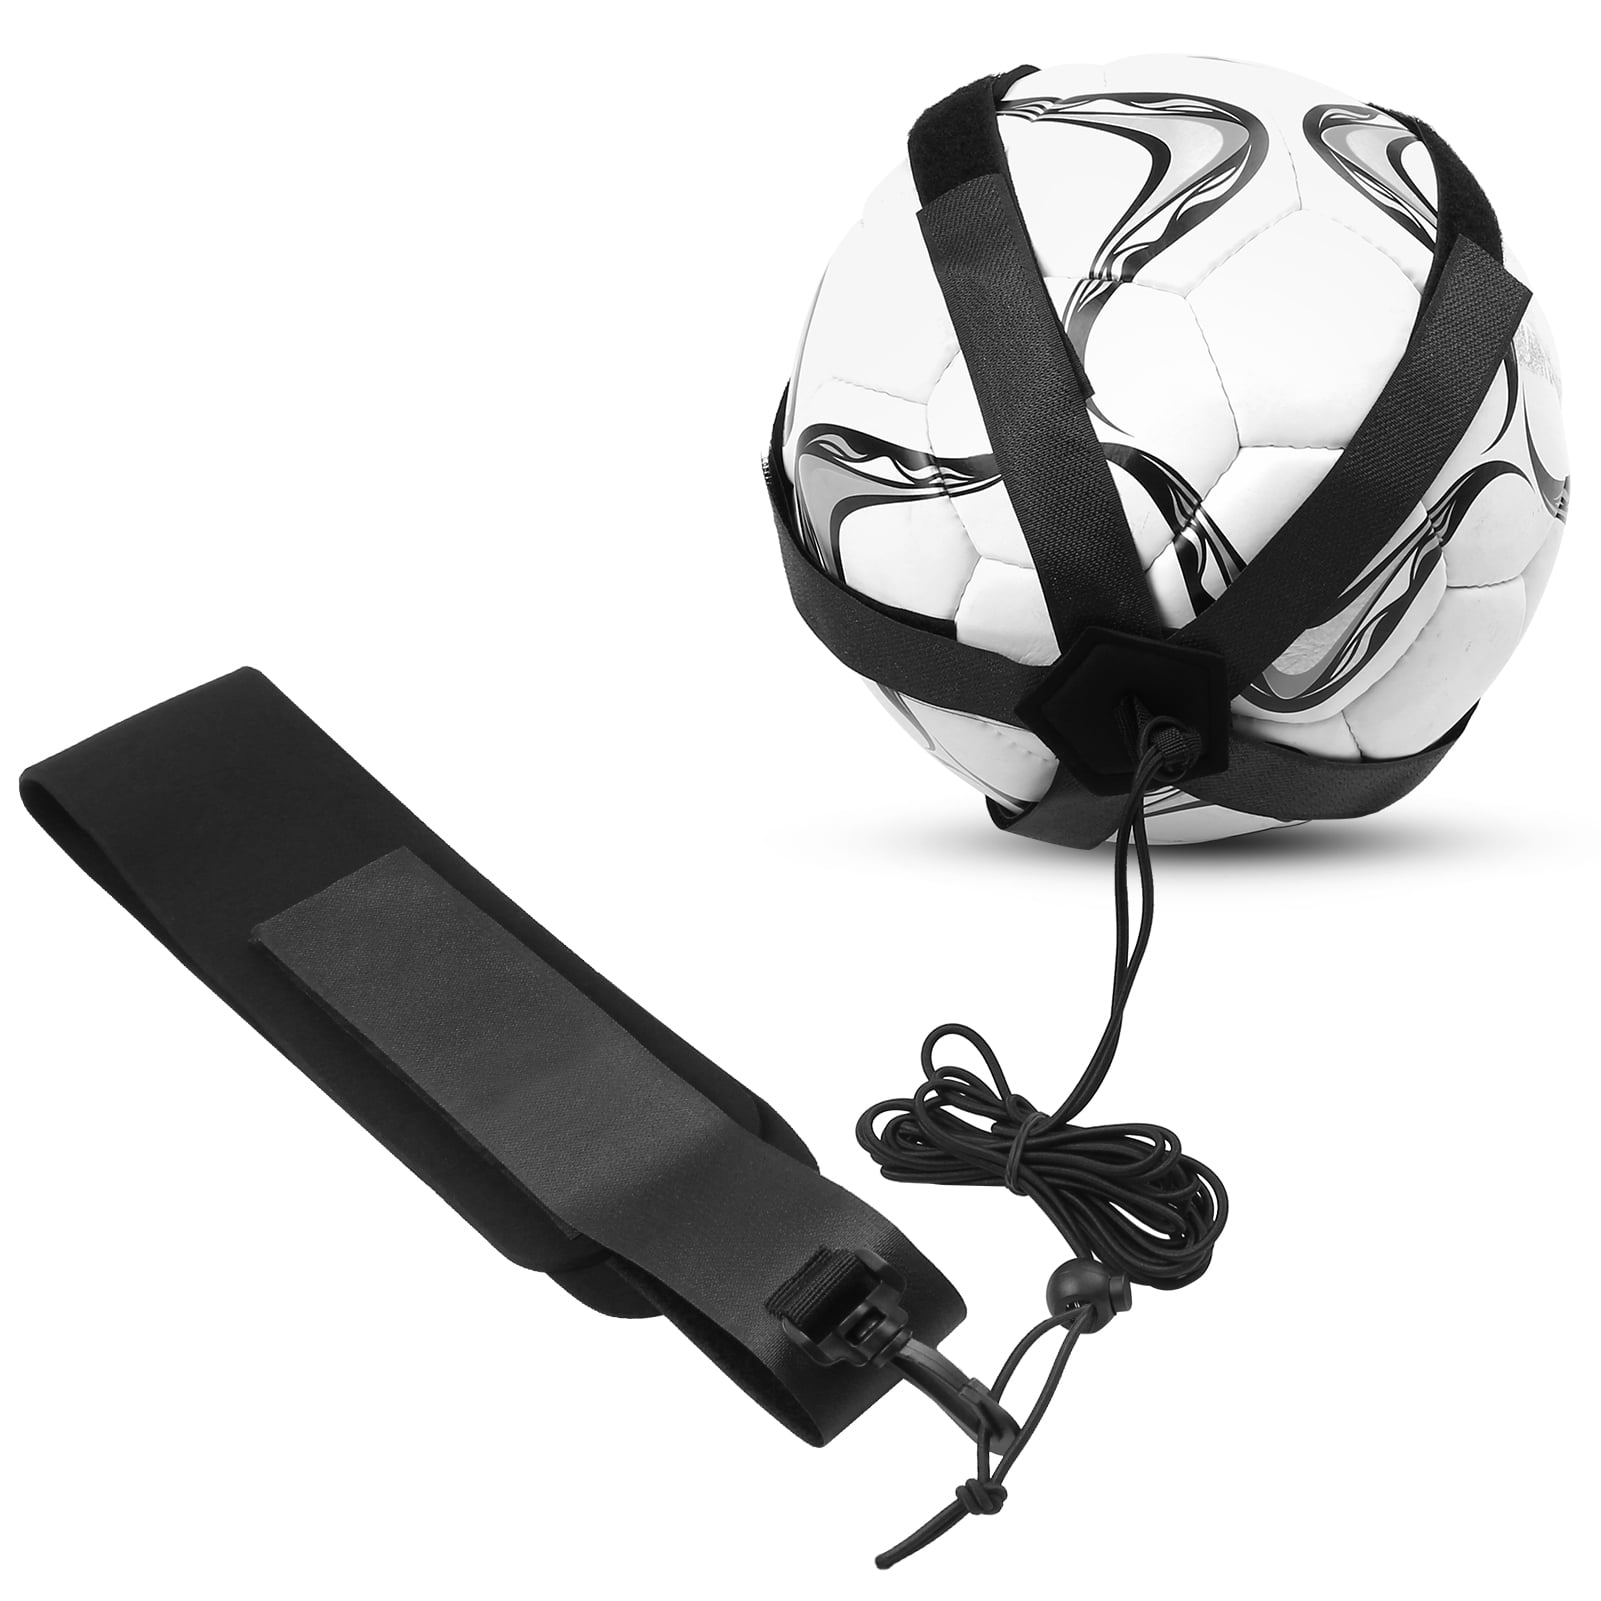 MiOYOOW Volleyball Training Equipment Aid Volleyball Hitting Trainer Adjustable Waist Belt for Beginners and Volleyball Player 